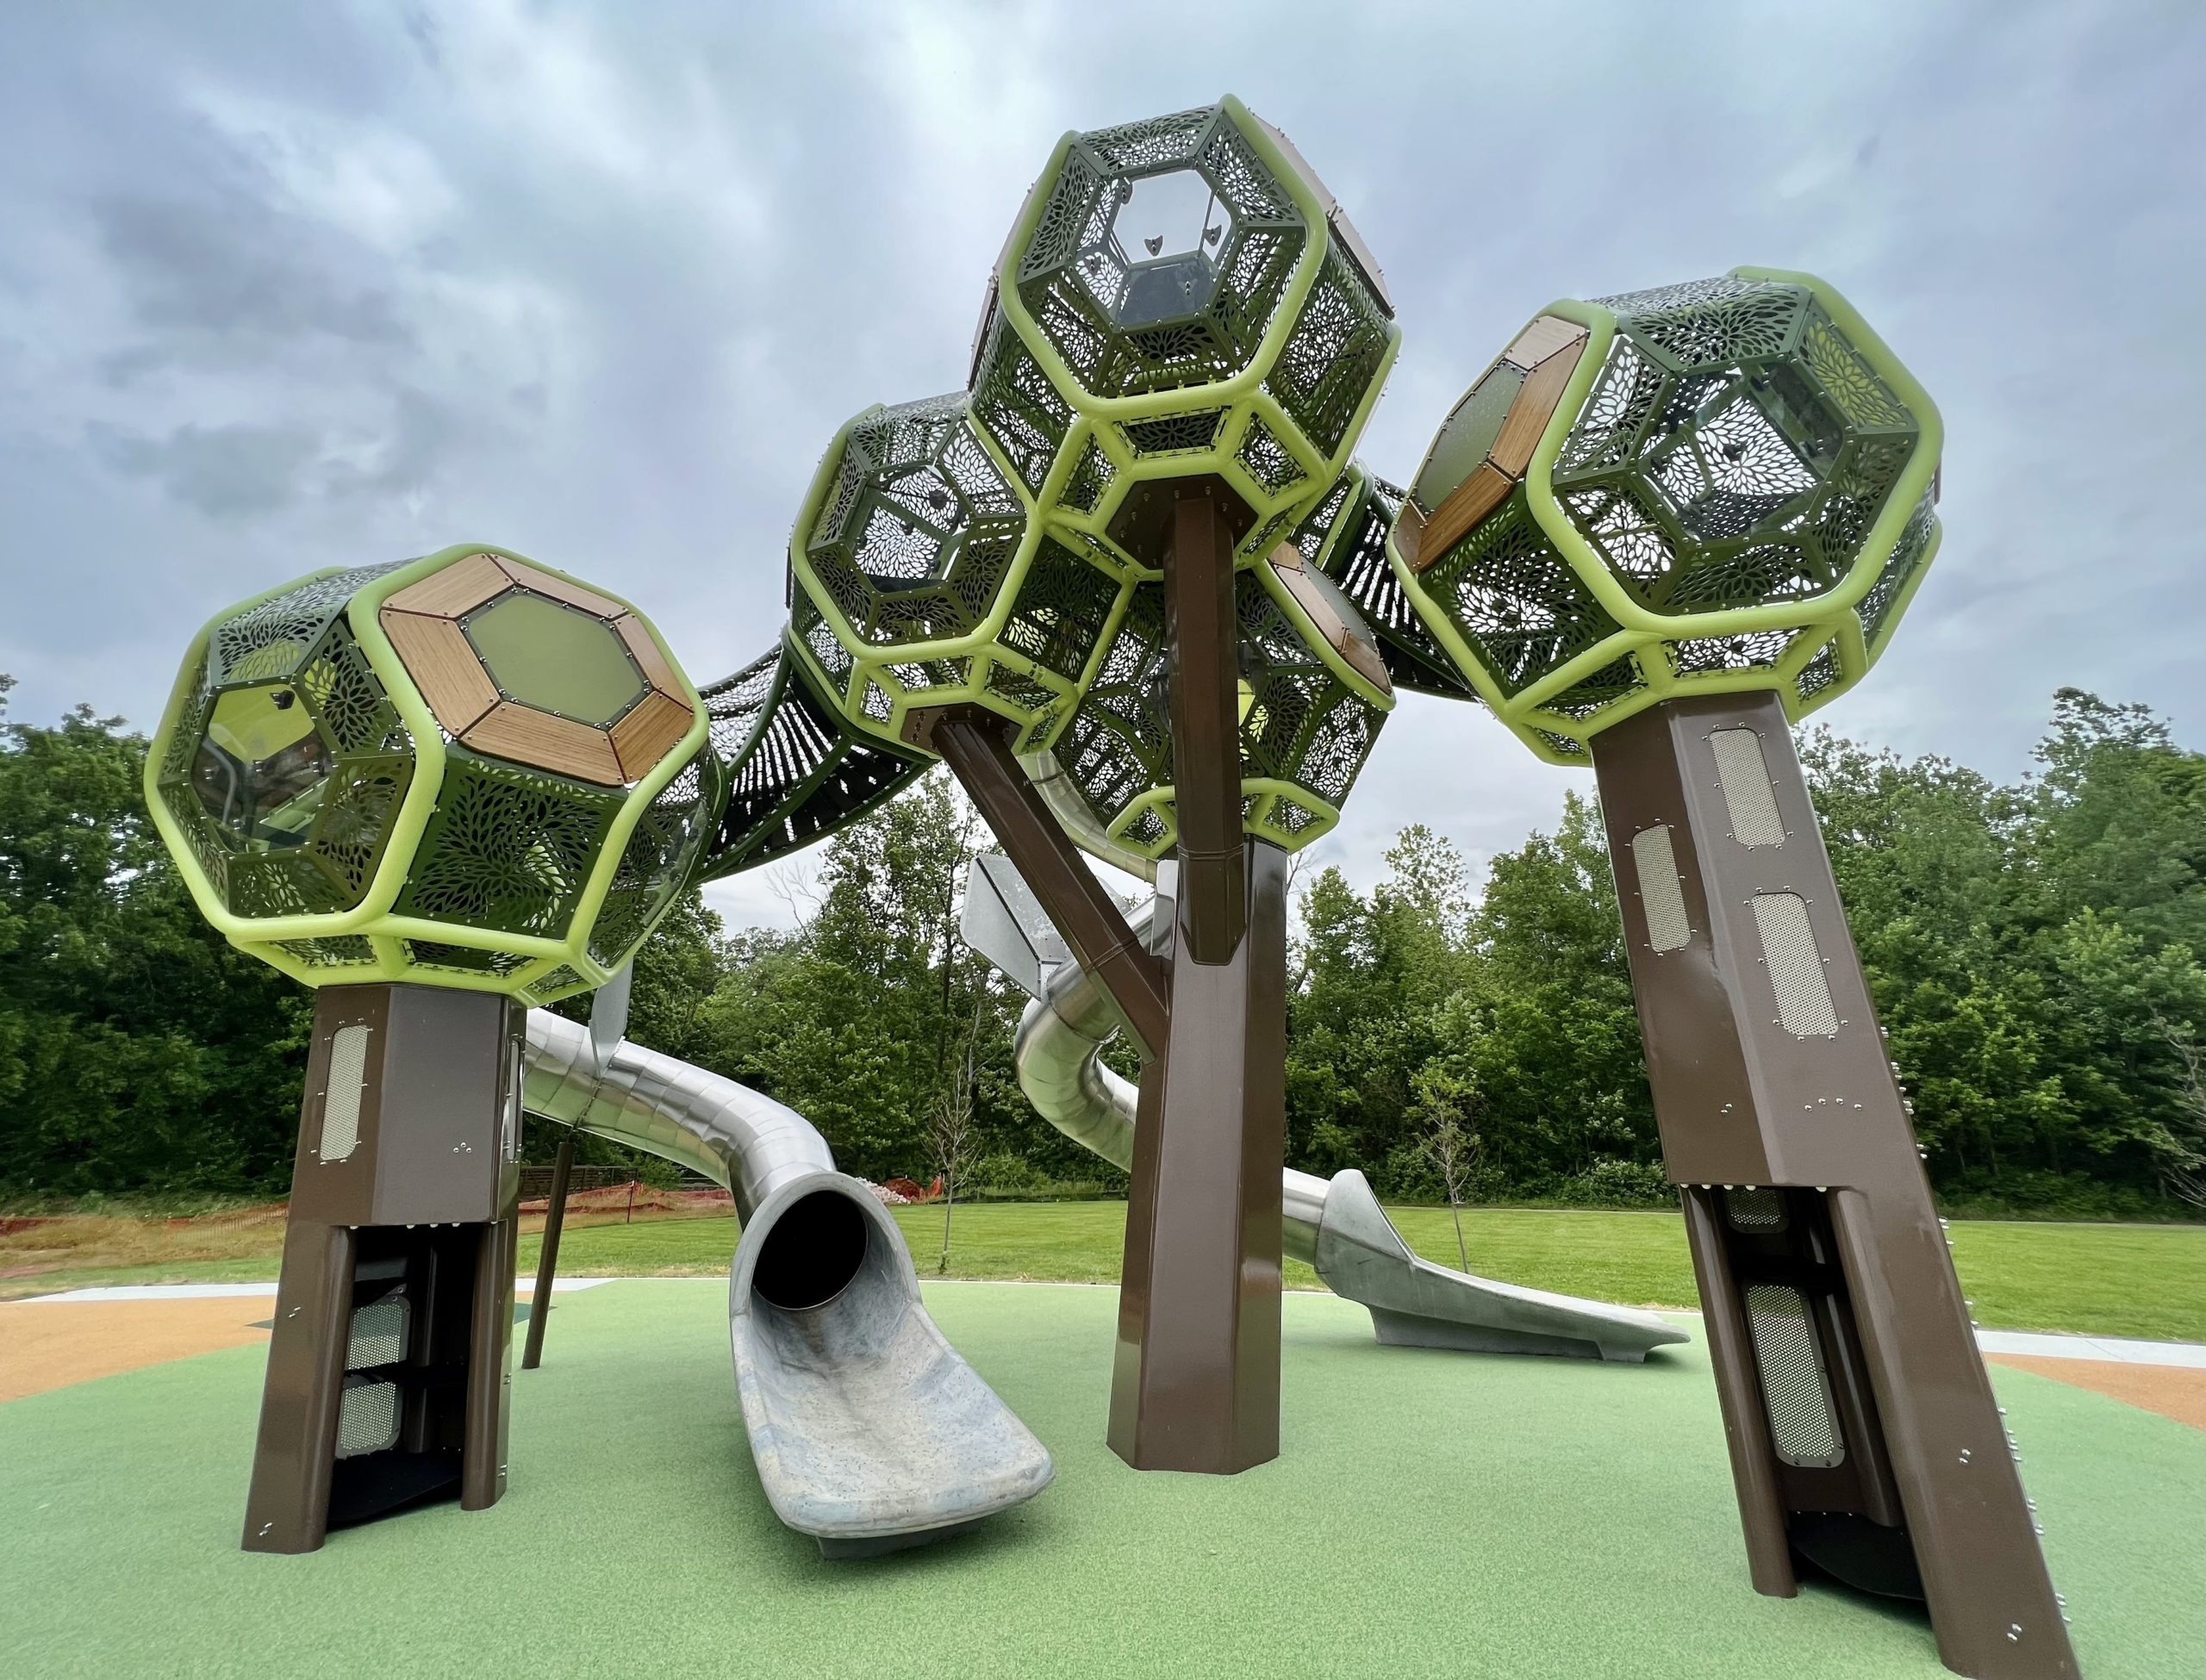 Hexagonal hive structure playground at Meadowlark Park.